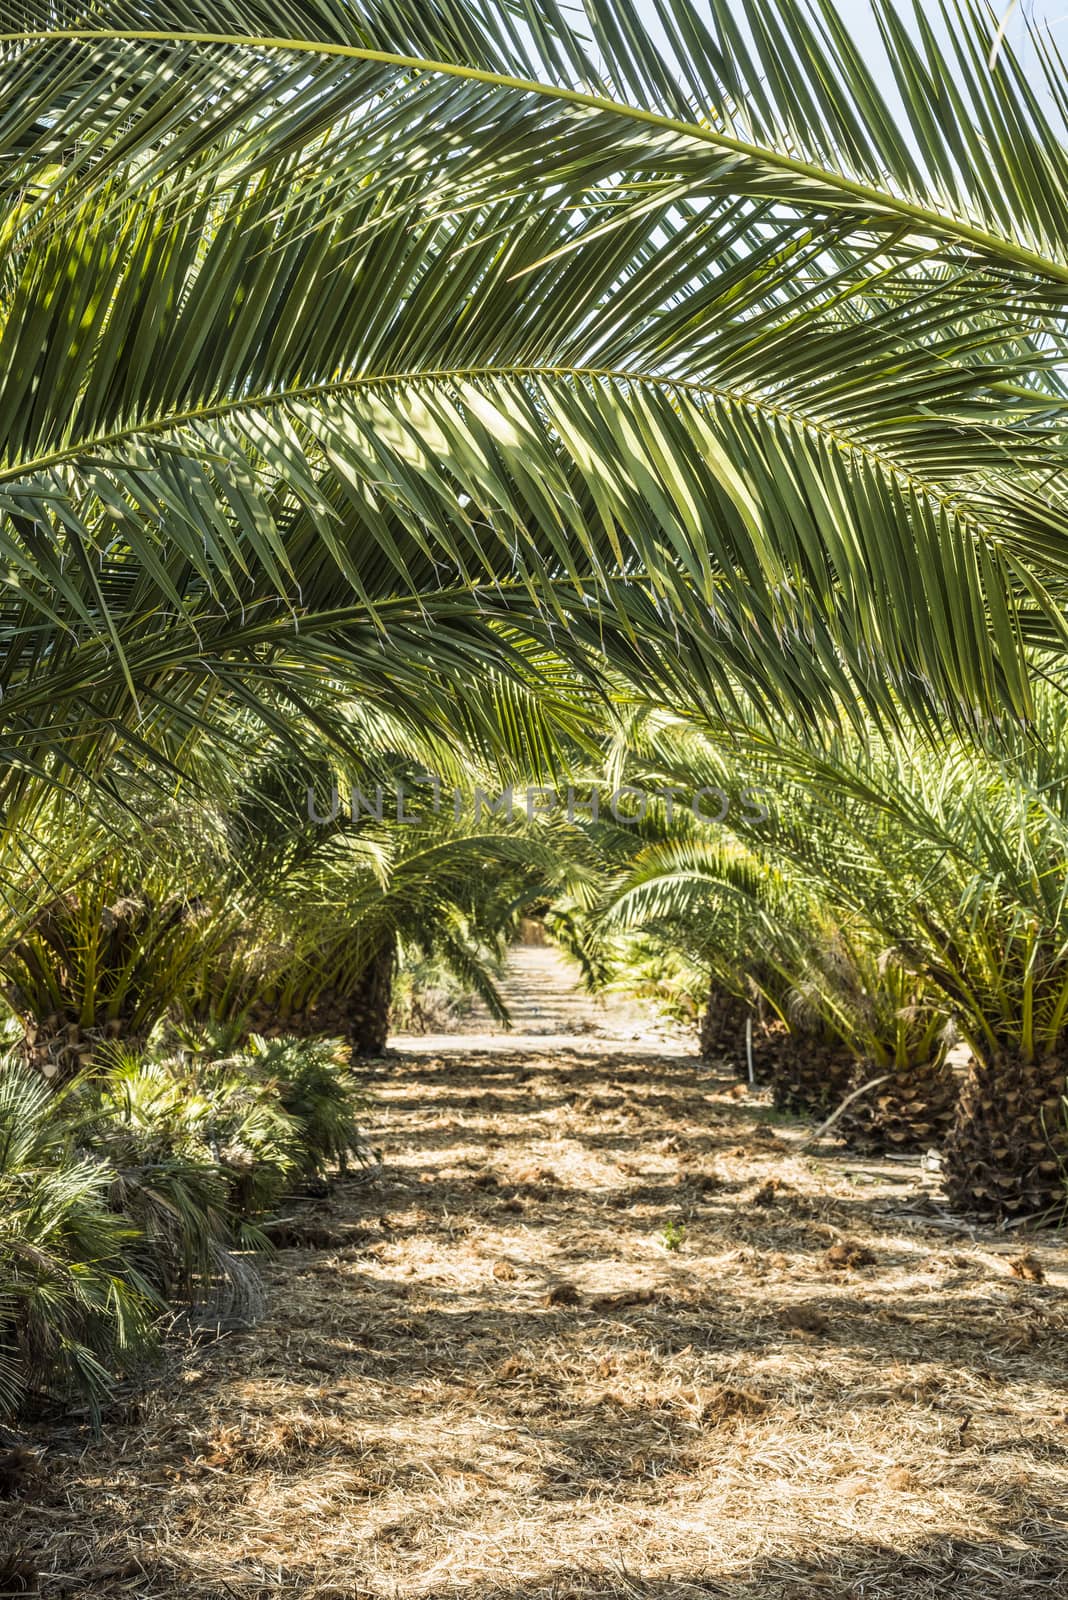 Rows of small palm trees in a palm tree farm by Njean